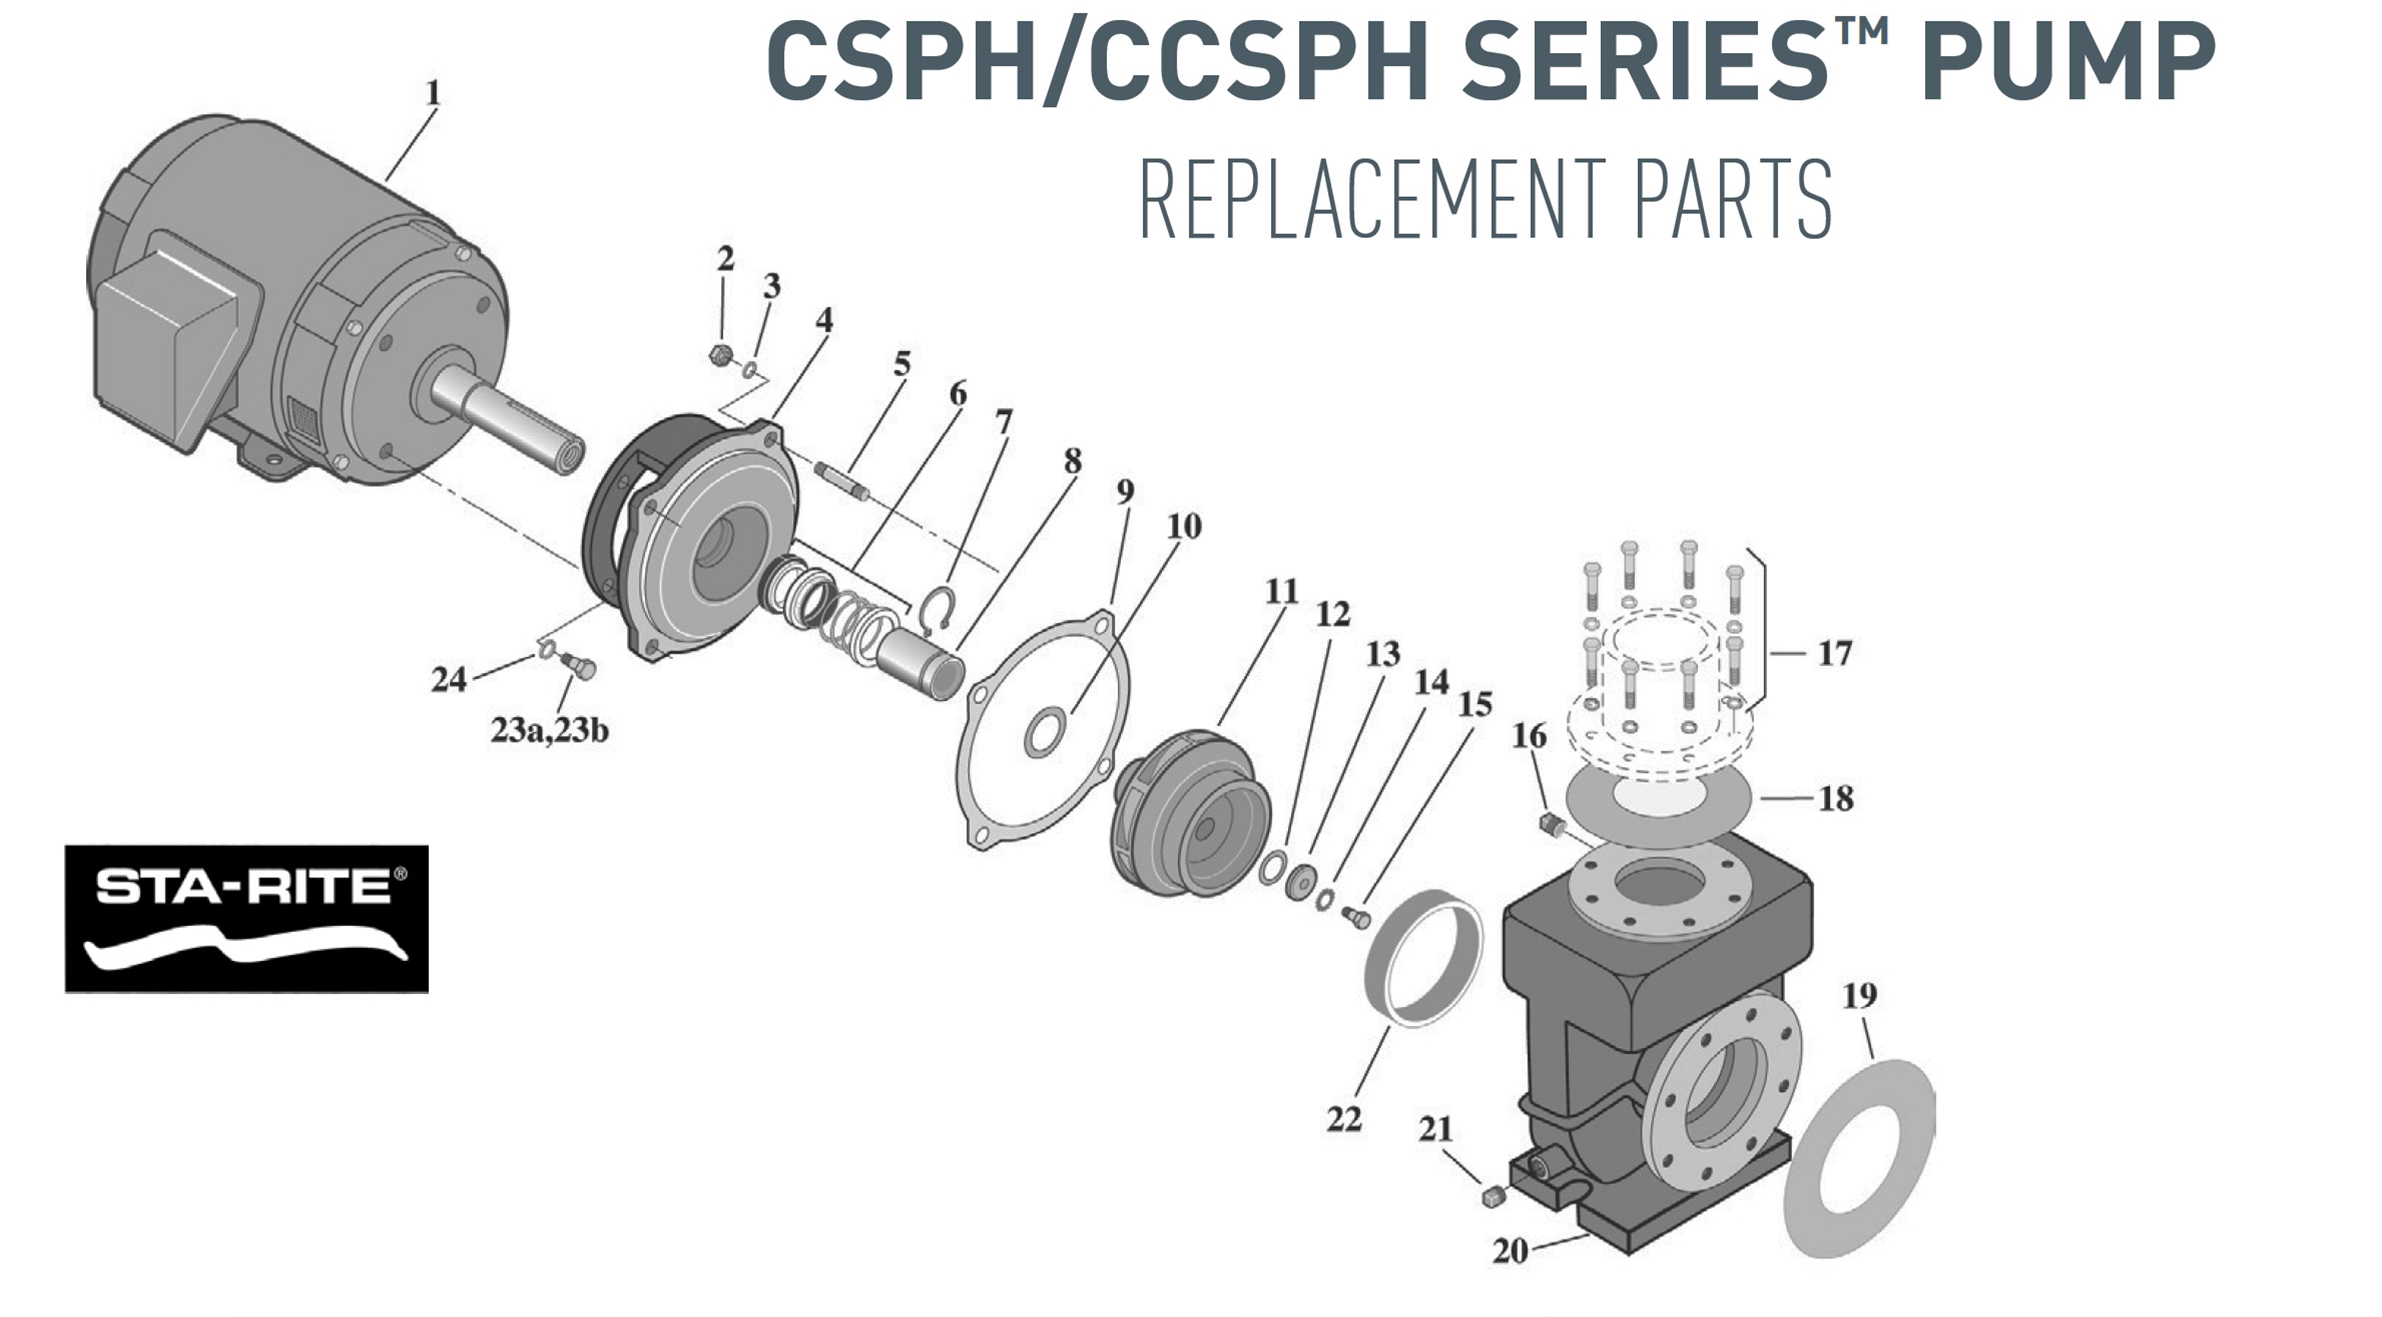 Pentair S32014 Mechanical Shaft Seal Replacement for Pentair CSPH//CCSPH Series Pool and Spa Commercial Pump